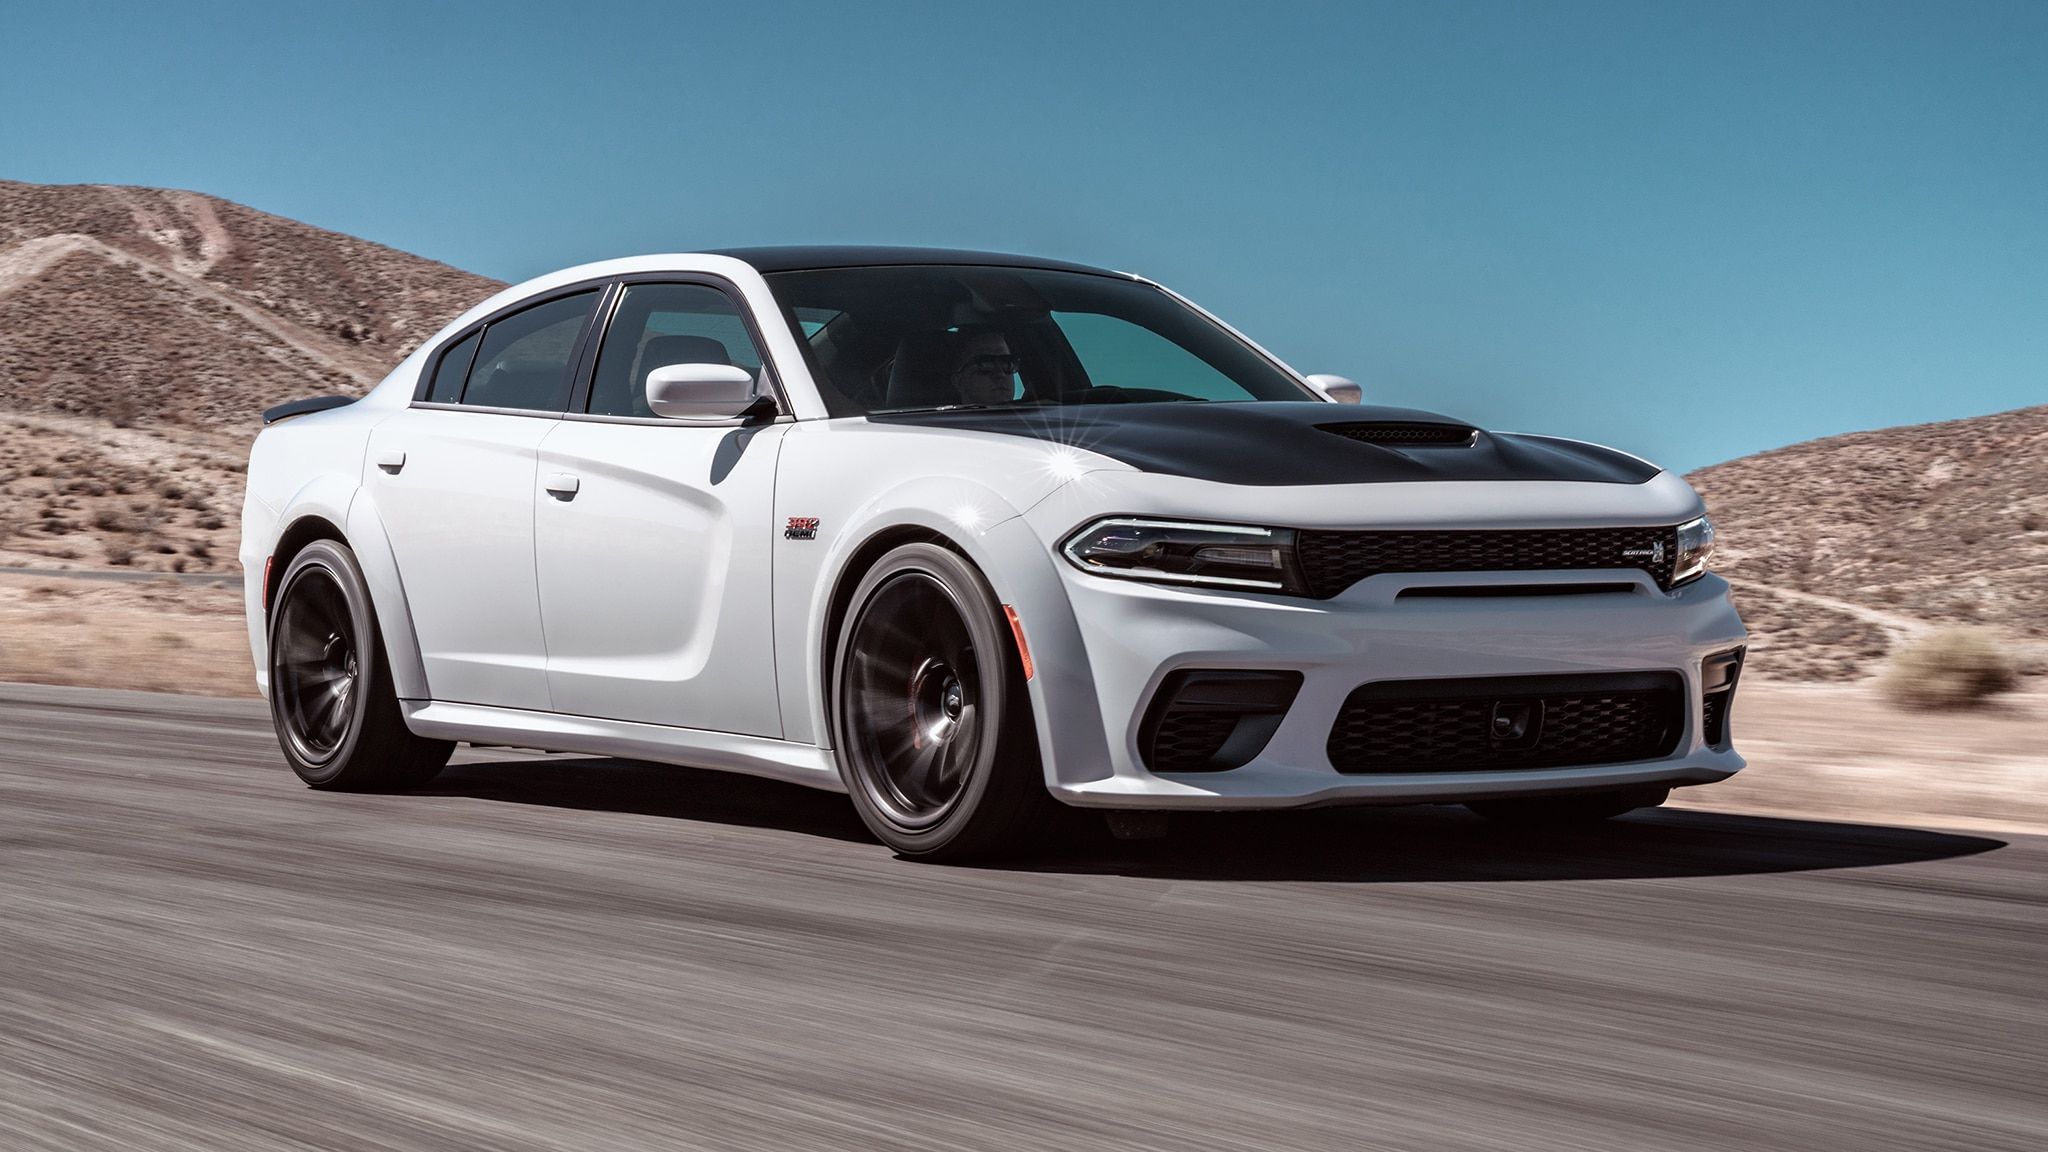 Dodge Charger Prices Announced for Daytona, Hellcat Widebody, Scat Pack, and More